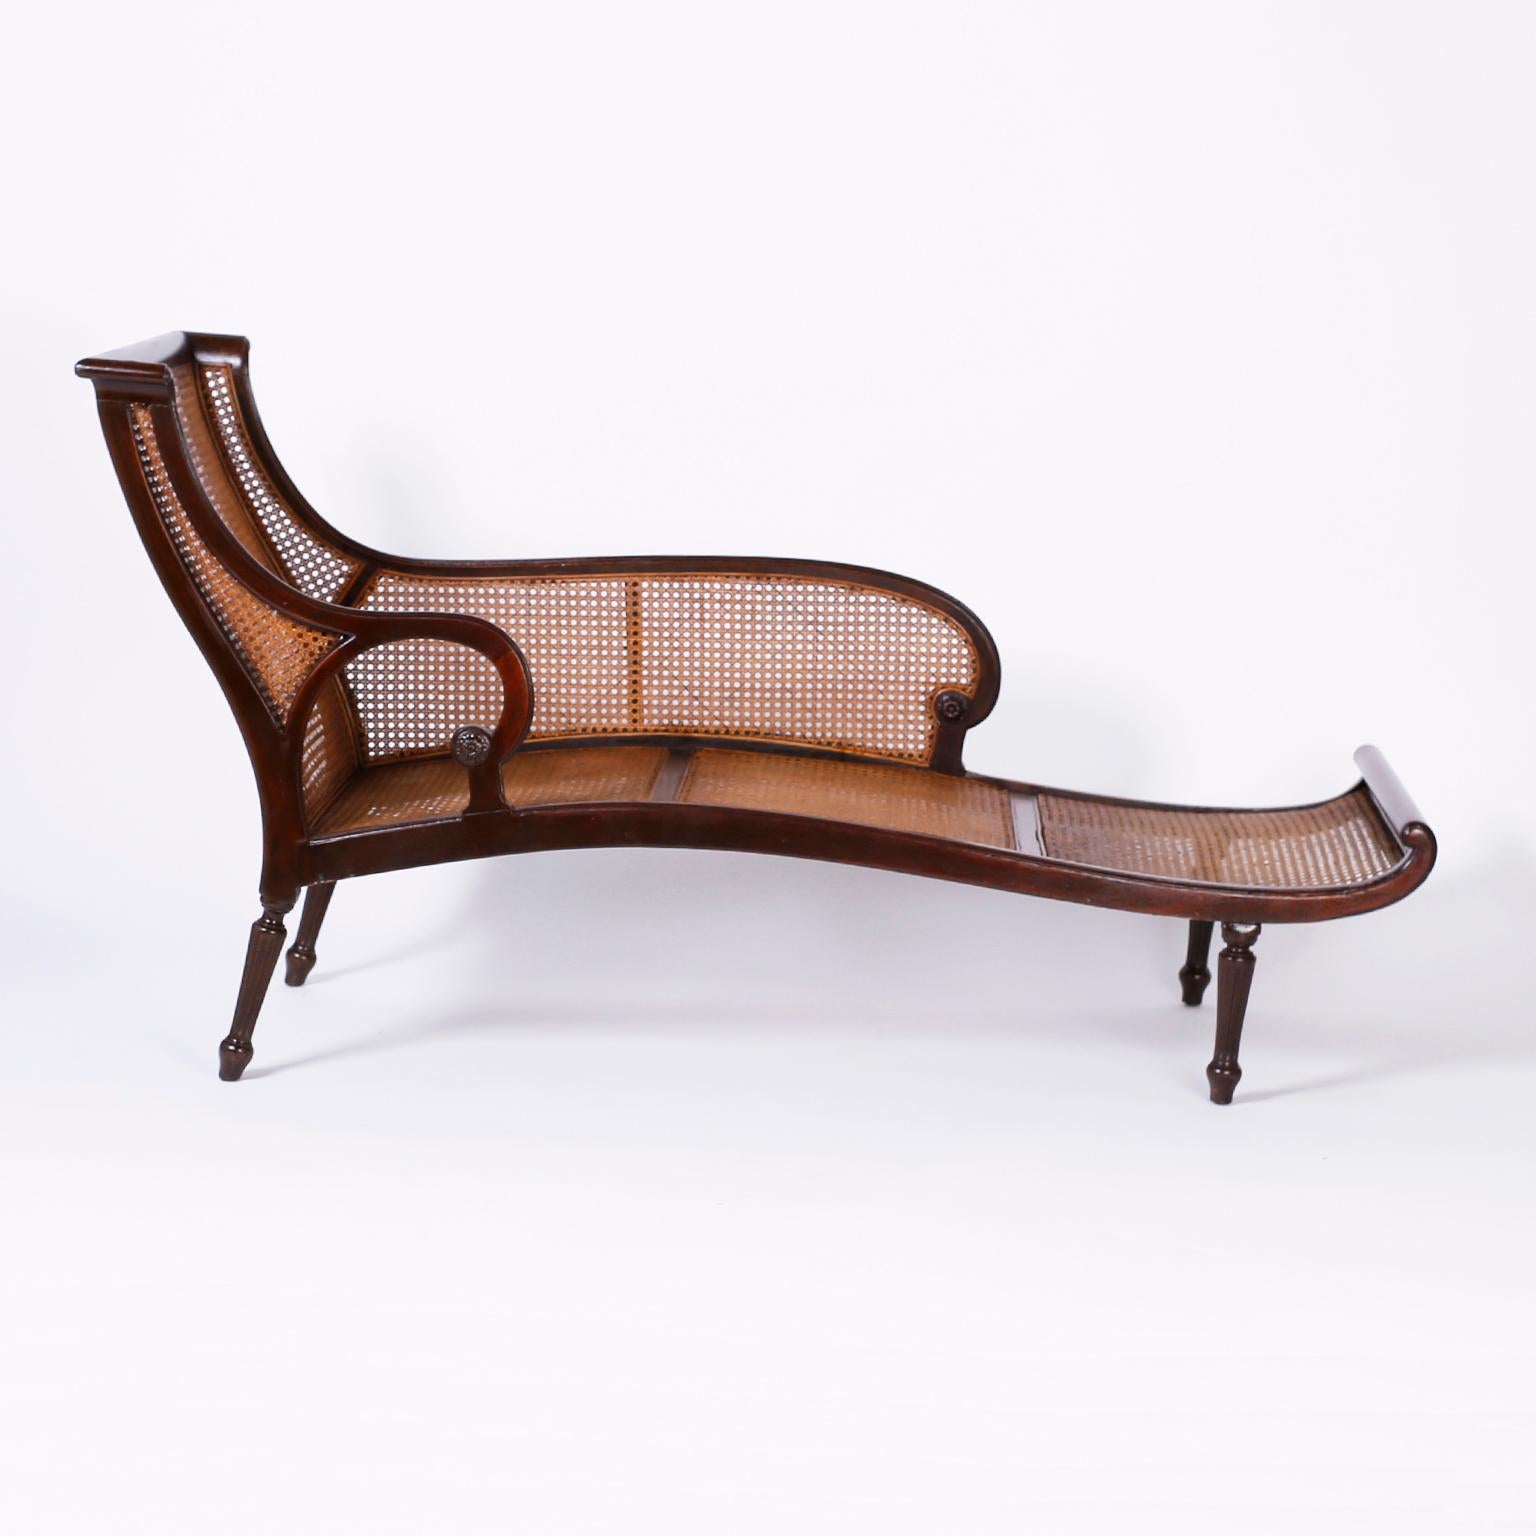 Antique British colonial chaise lounge crafted in mahogany with an elegant art nouveau influenced form, caned back, seat and side, on turned and fluted tapered legs.